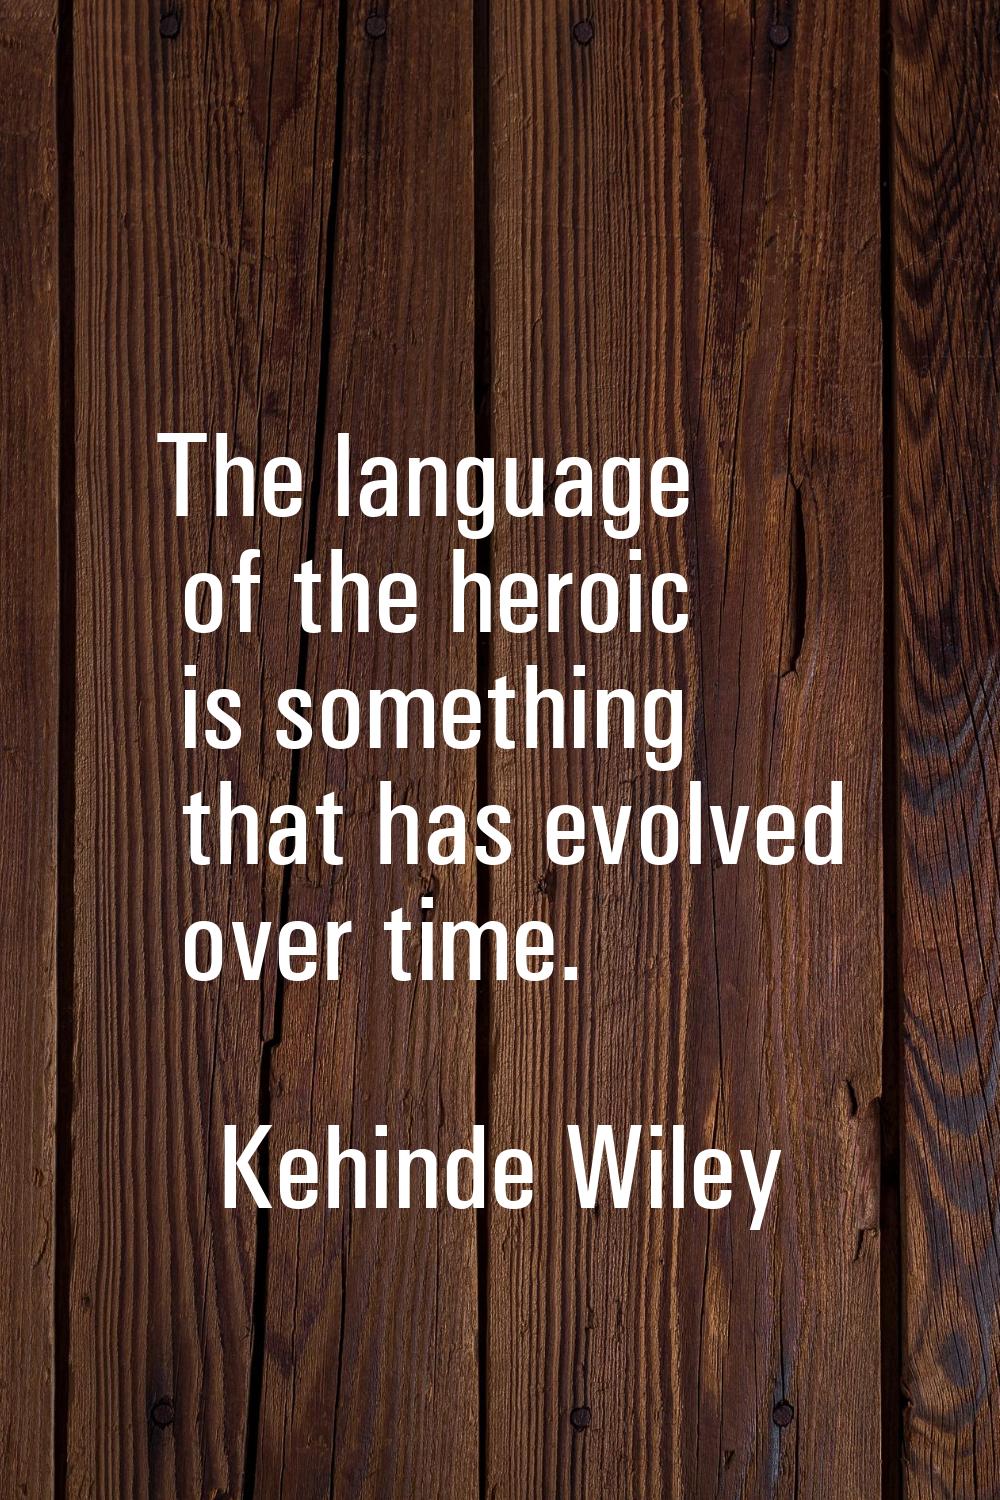 The language of the heroic is something that has evolved over time.